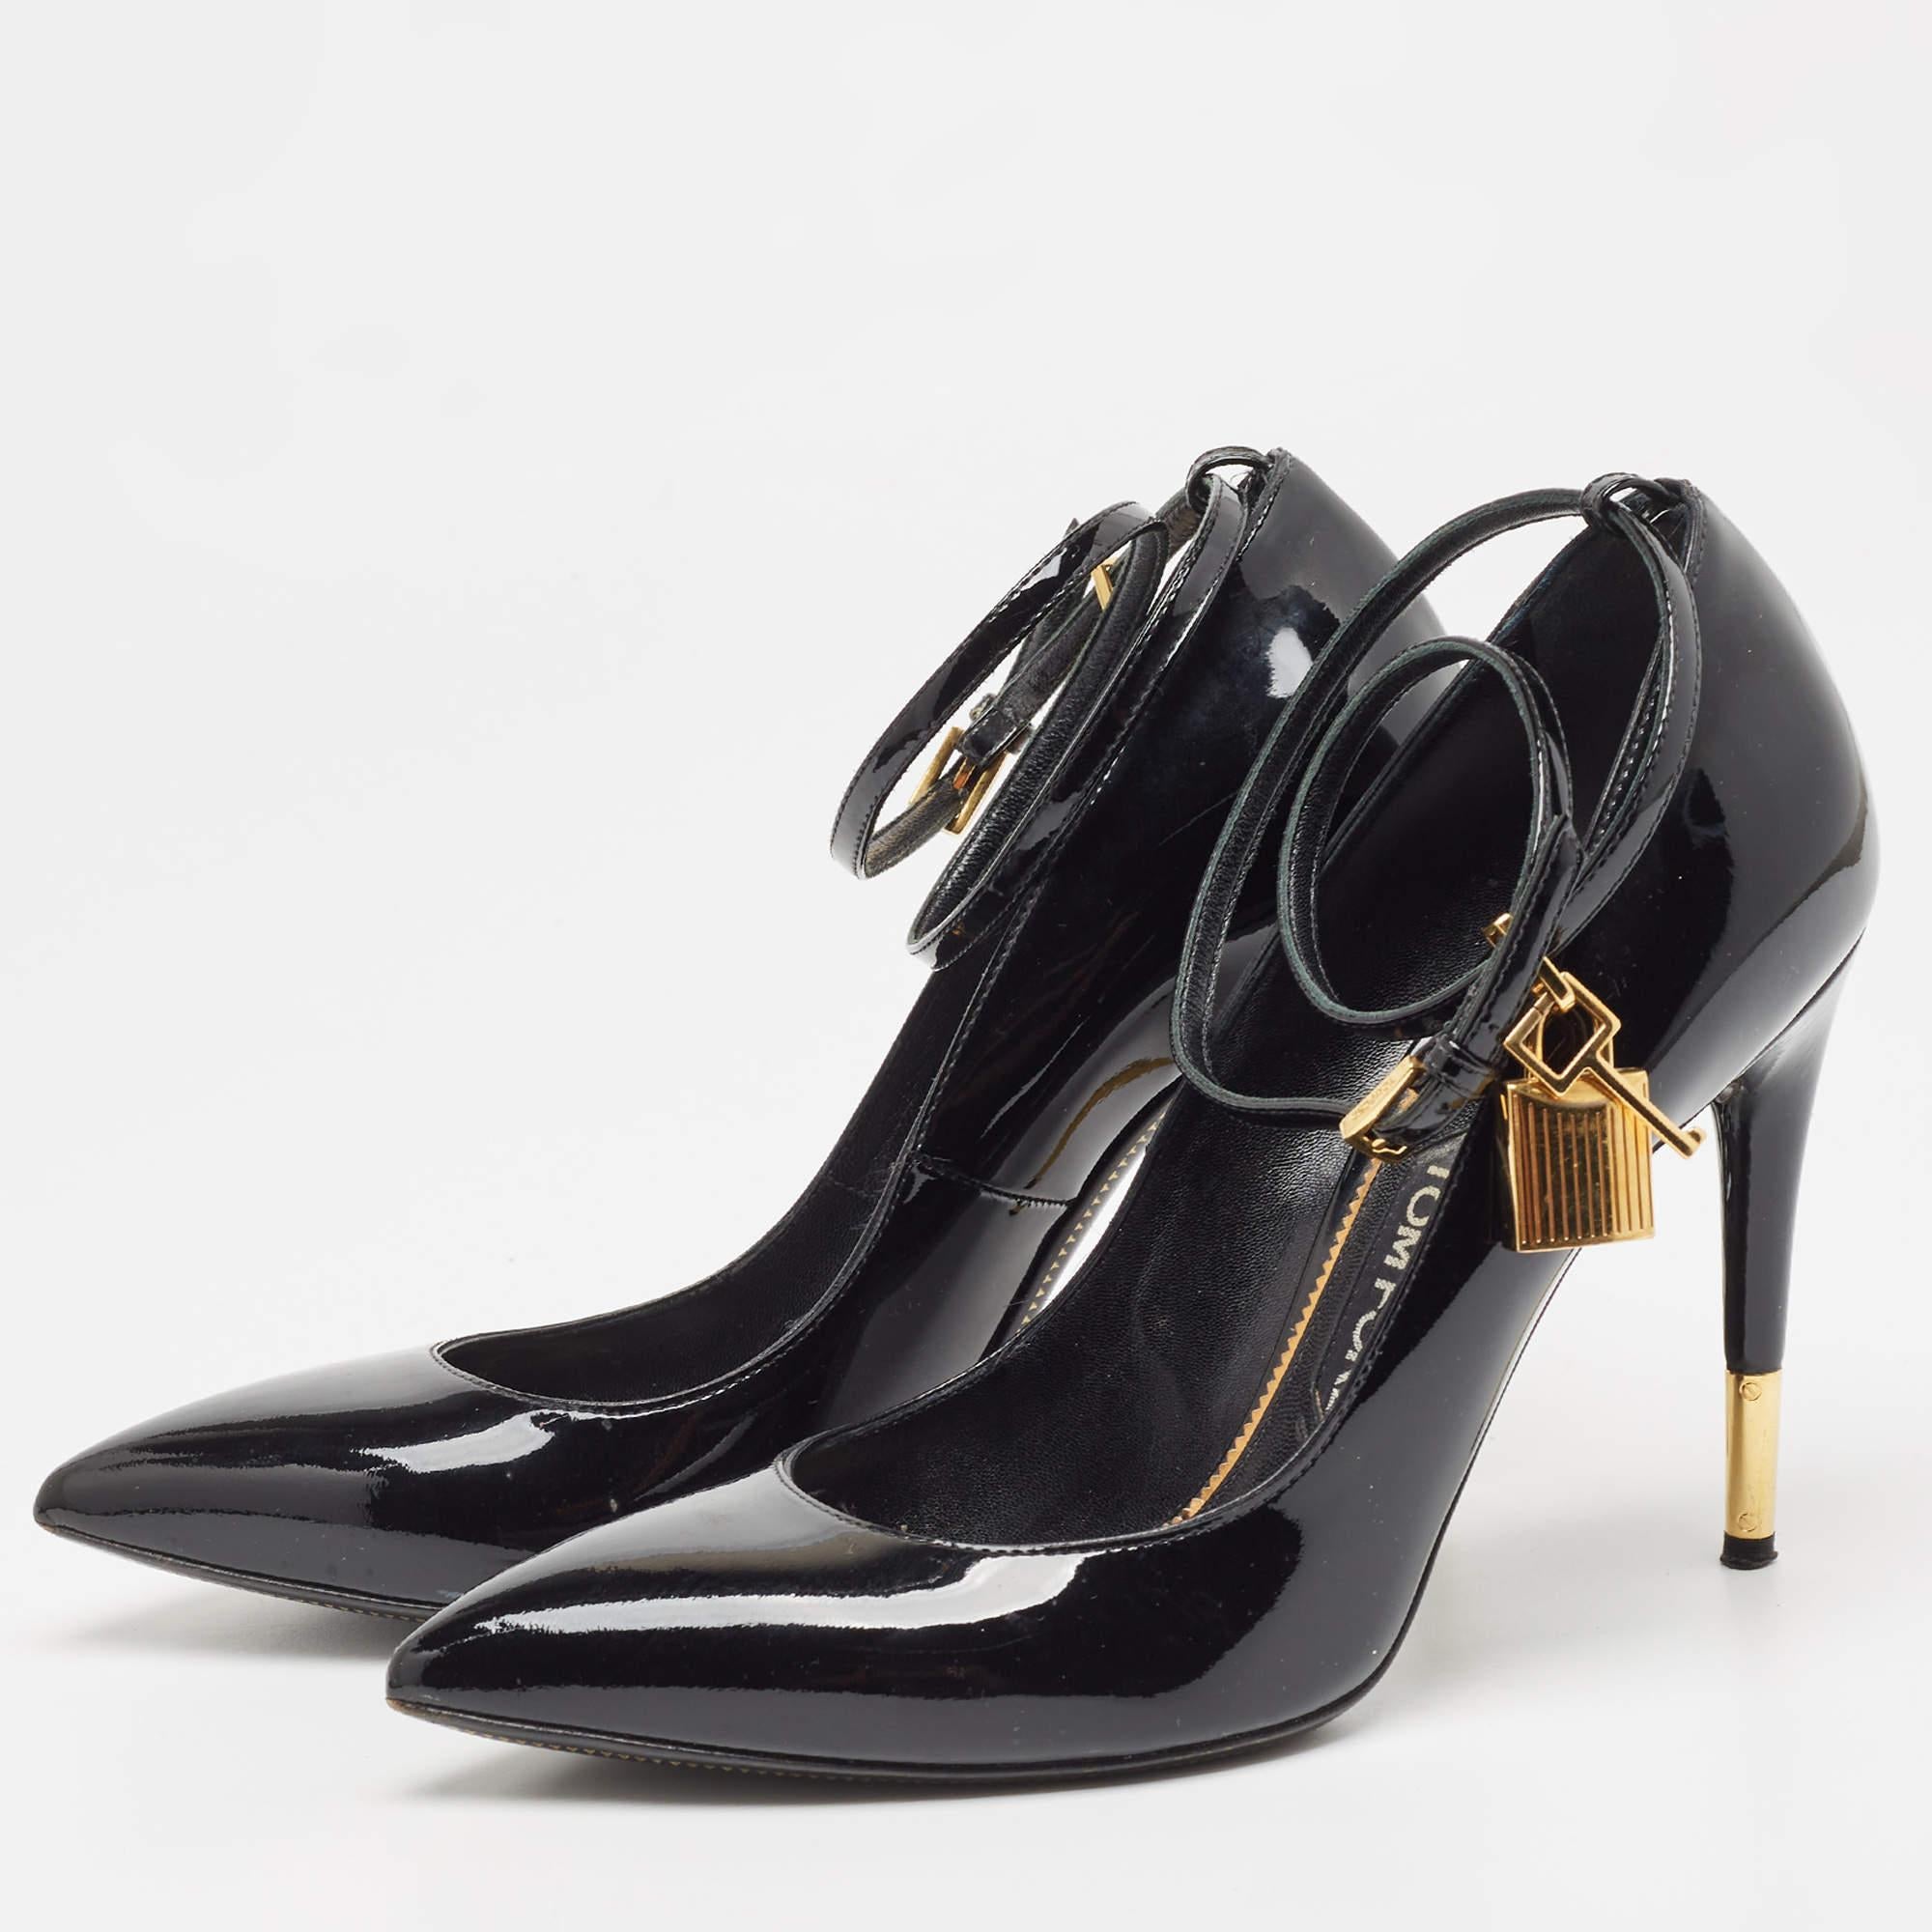 Tom Ford Black Patent Leather Padlock Ankle Wrap Pumps Size 39 In Good Condition For Sale In Dubai, Al Qouz 2